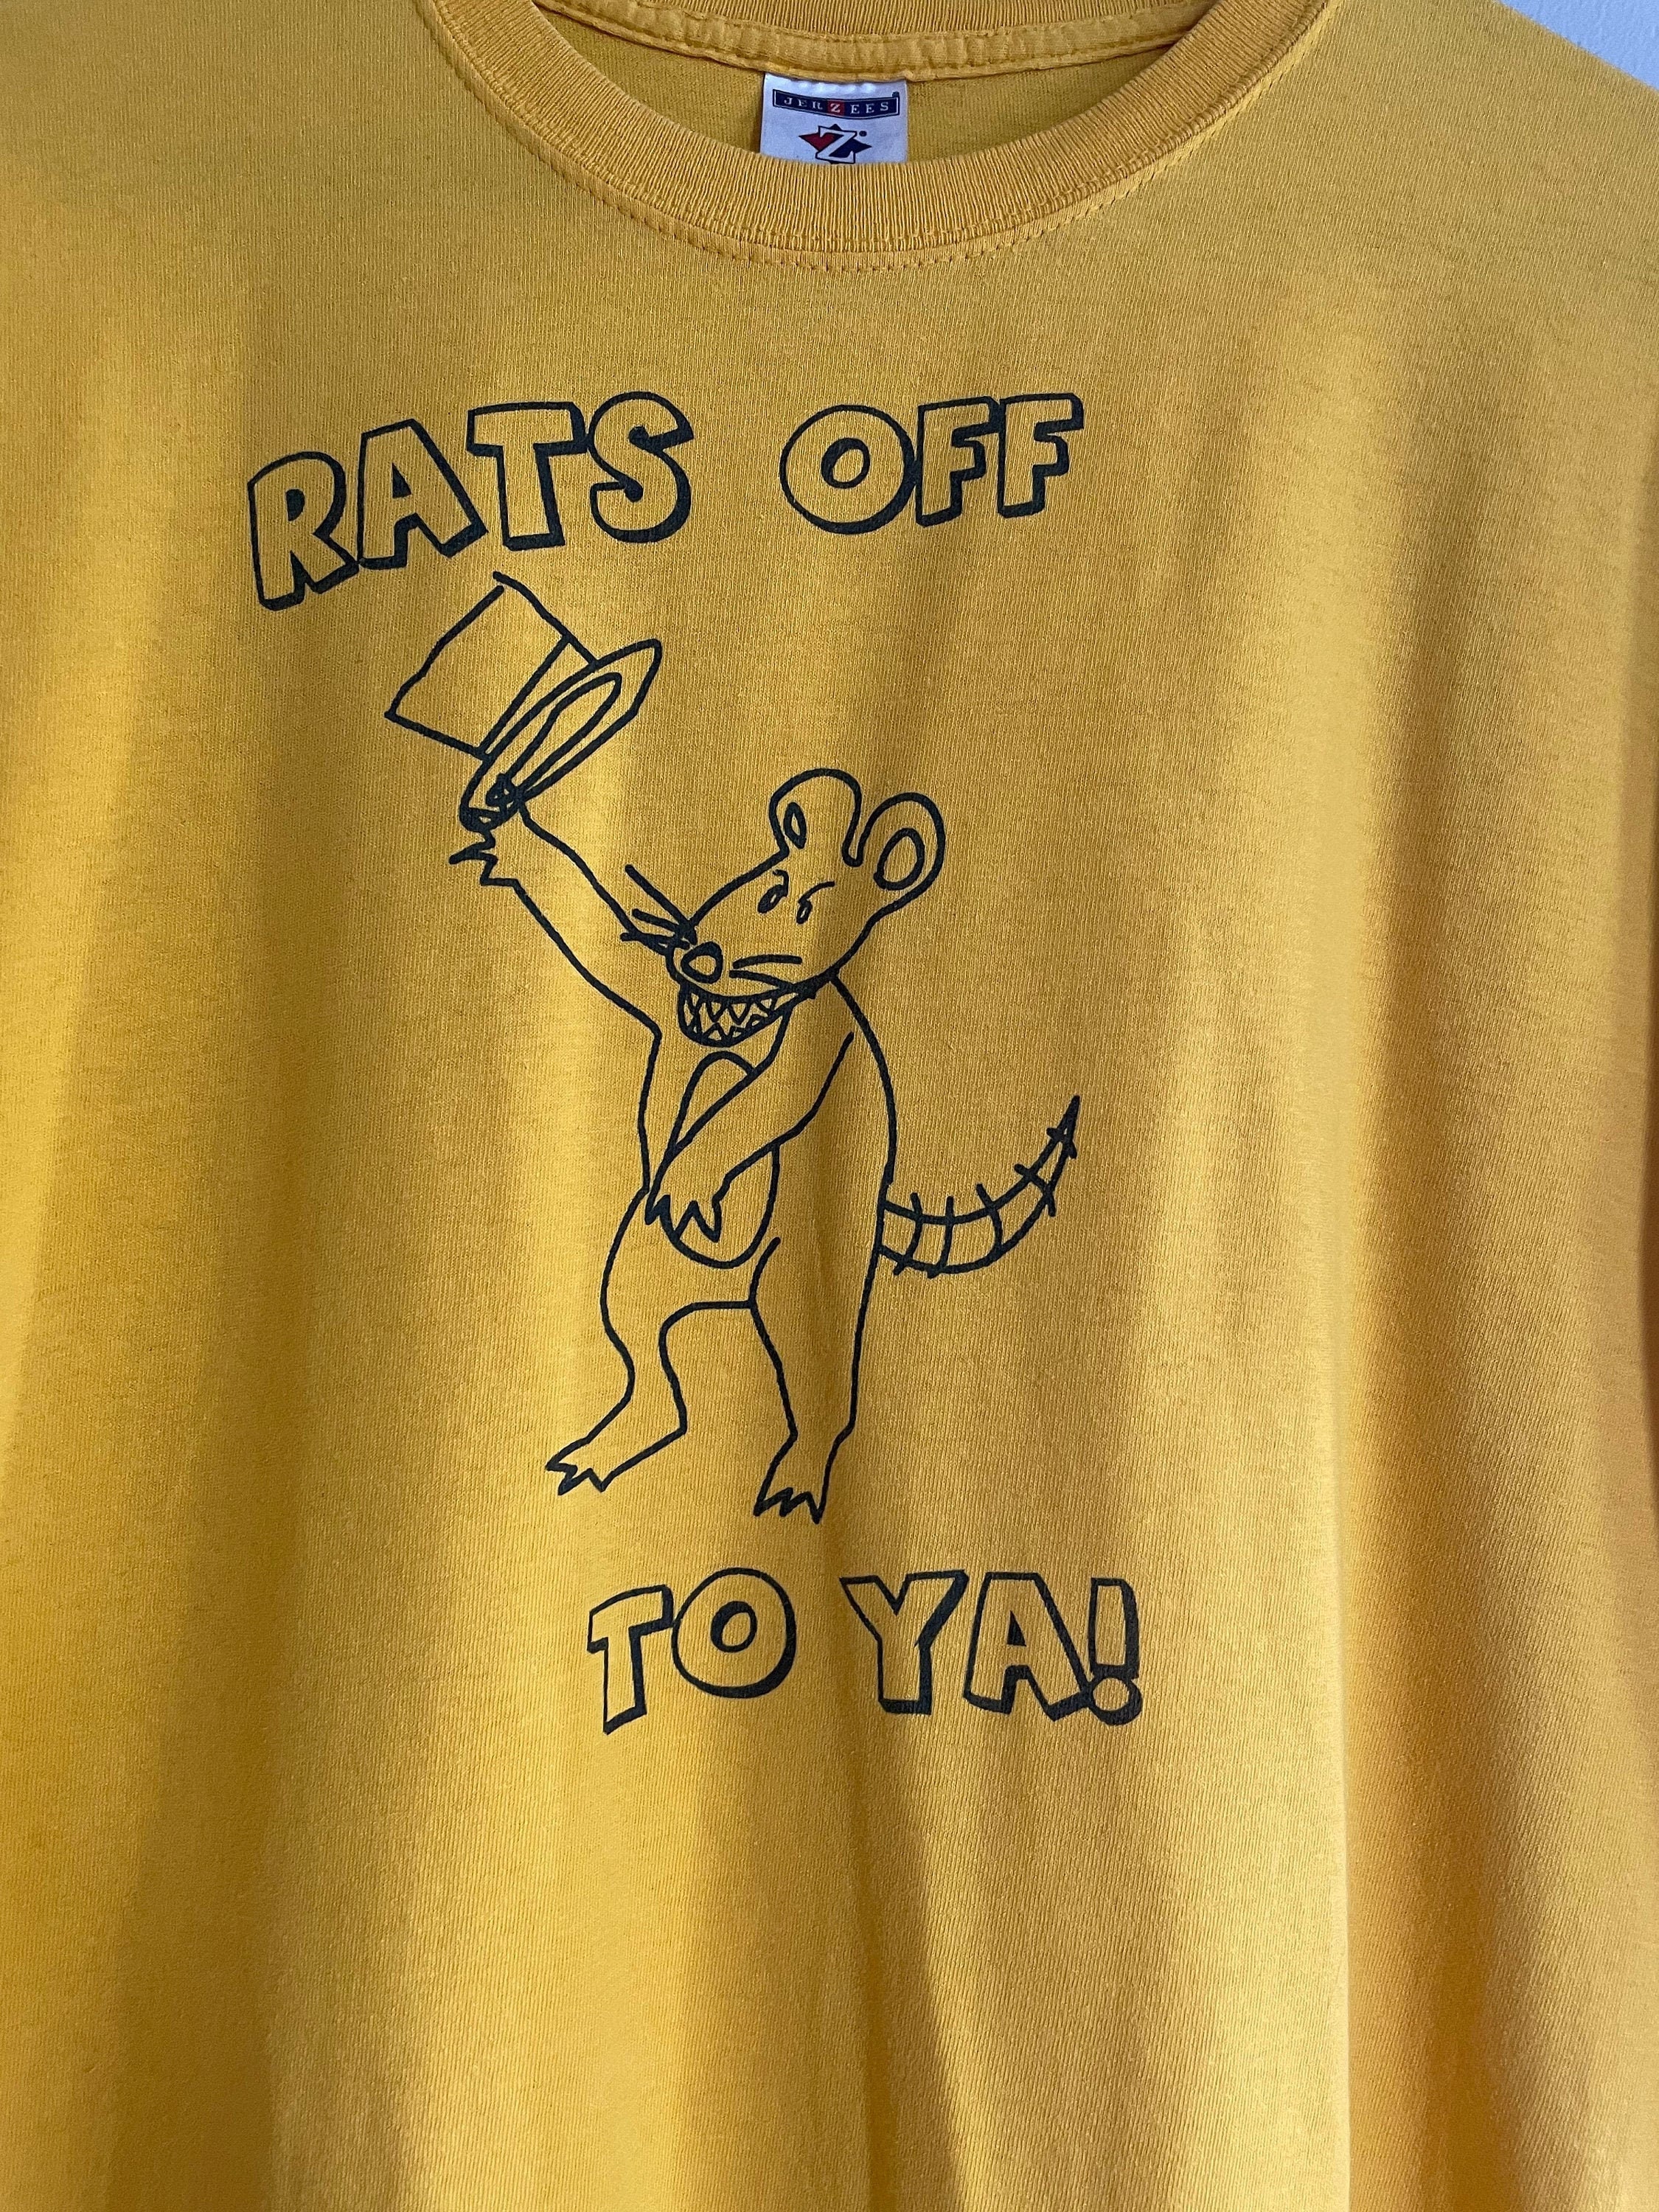 Vintage Tim and Eric Tom Goes to the Rats off to Ya - Etsy